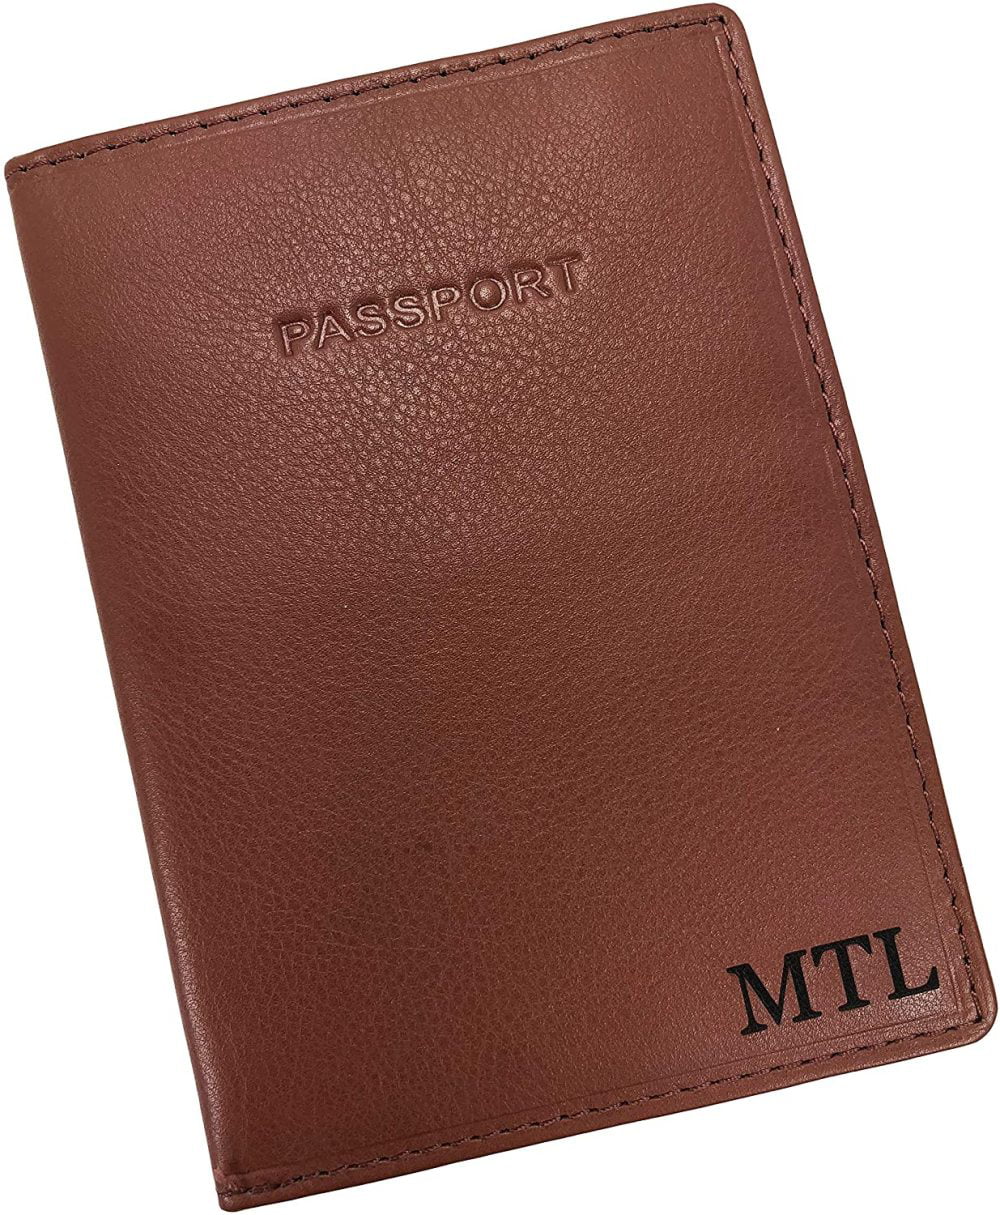 Personalised Mens Leather Card Wallet with RFID Fraud protection free engraving 